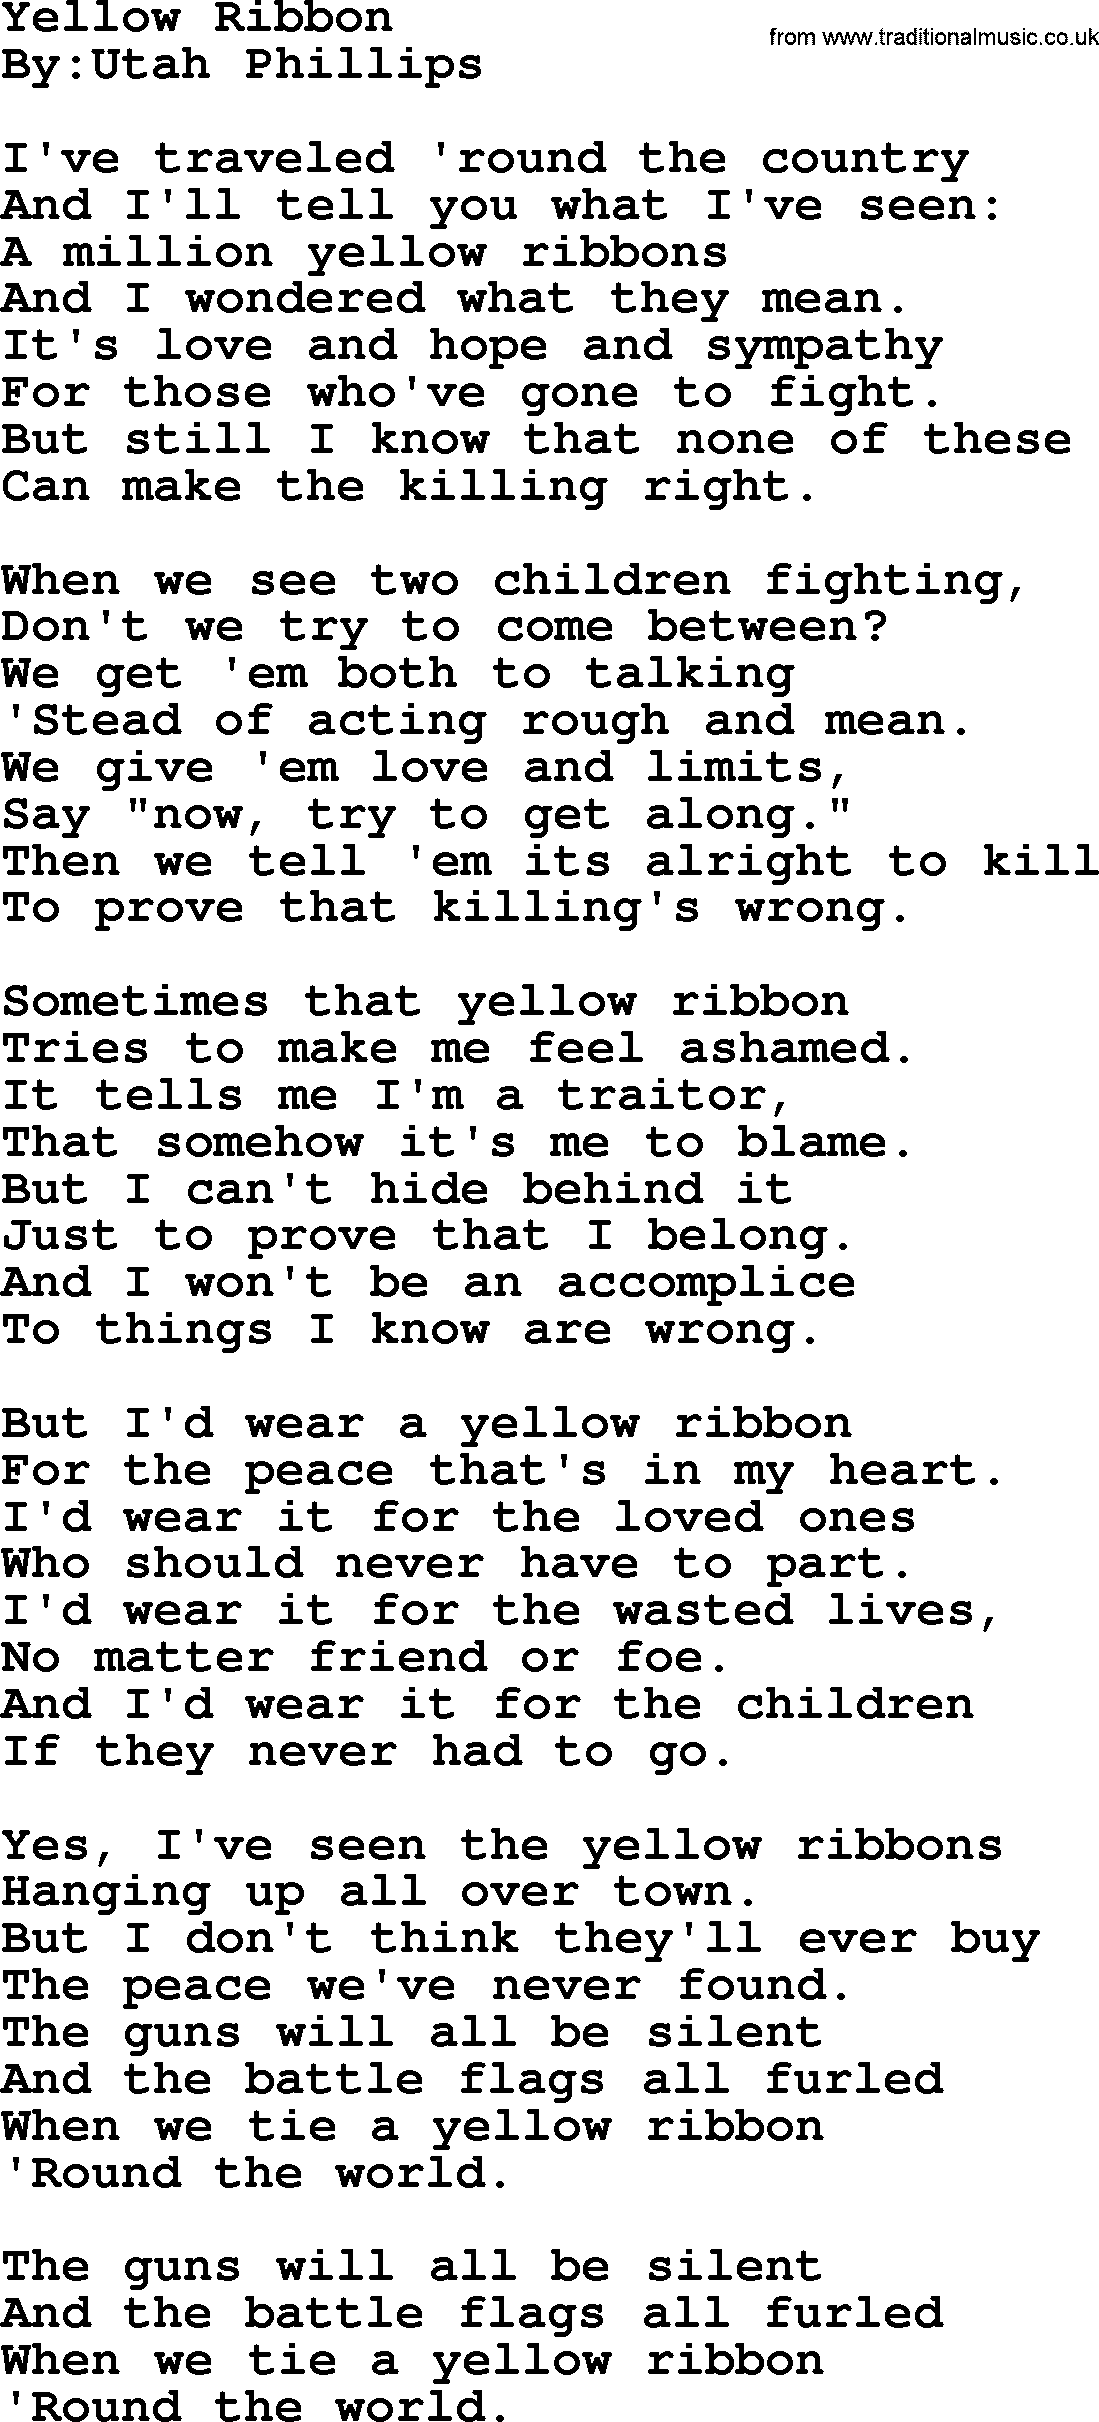 Political, Solidarity, Workers or Union song: Yellow Ribbon, lyrics